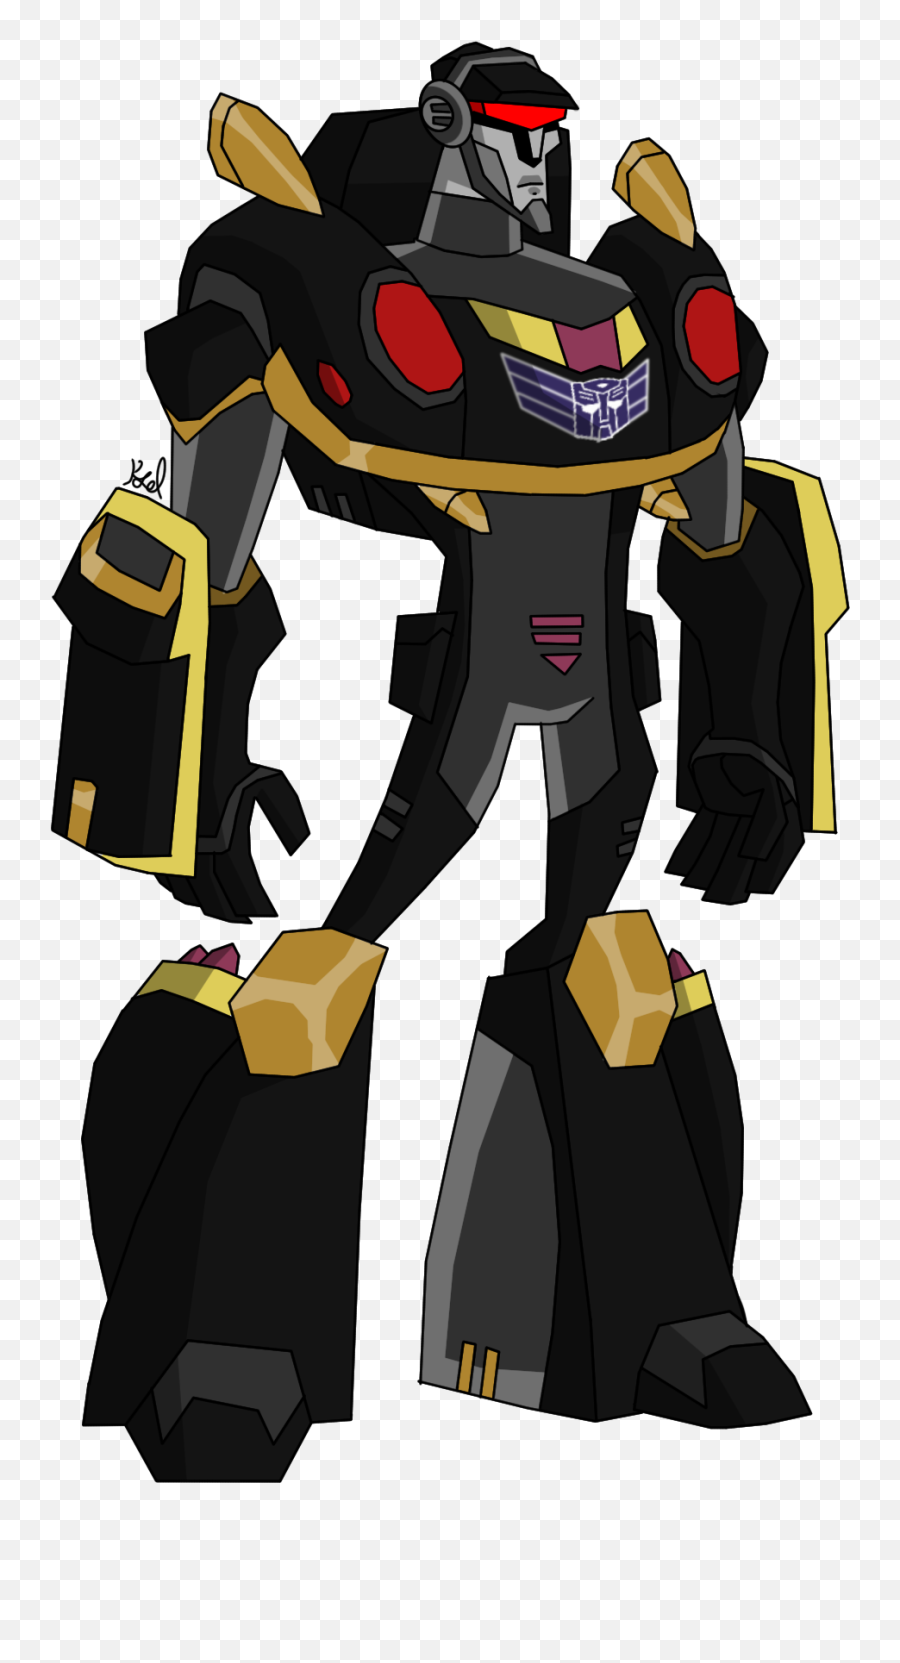 Shattered Glass Png - Redid The Colours For Shattered Glass Transformers Animated Shattered Glass,Shattered Glass Png